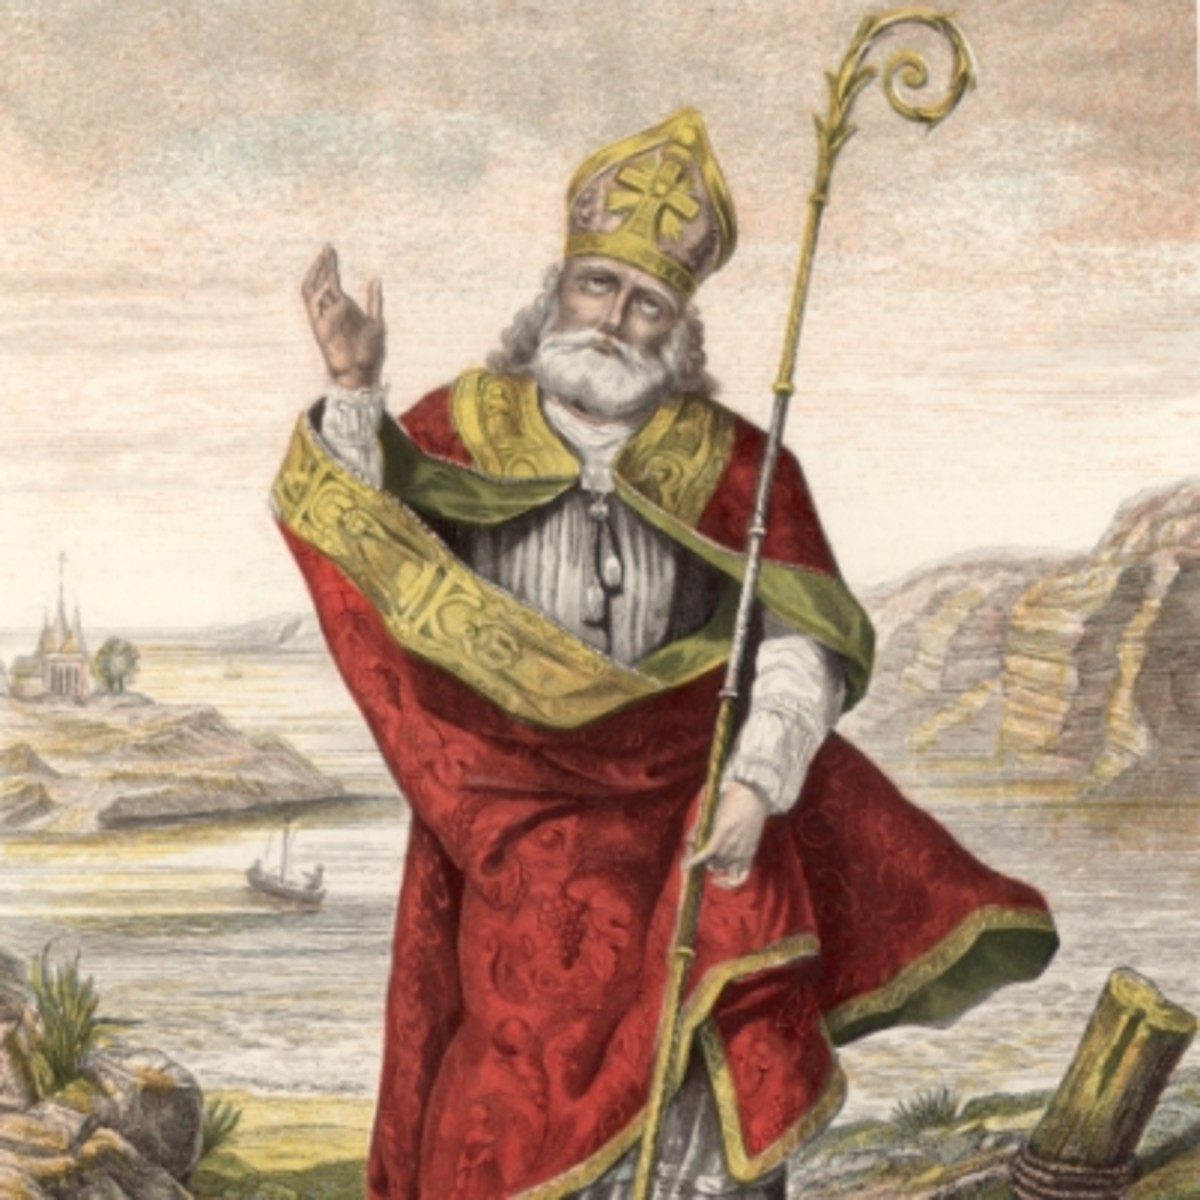 Patrick was a powerful, charismatic figure who attracted a large following, moving freely among Ireland's kingdoms.Familiar with the Irish language and culture, he adapted Celtic Paganism into his lessons of Christianity, rather than attempting to eradicate native beliefs.